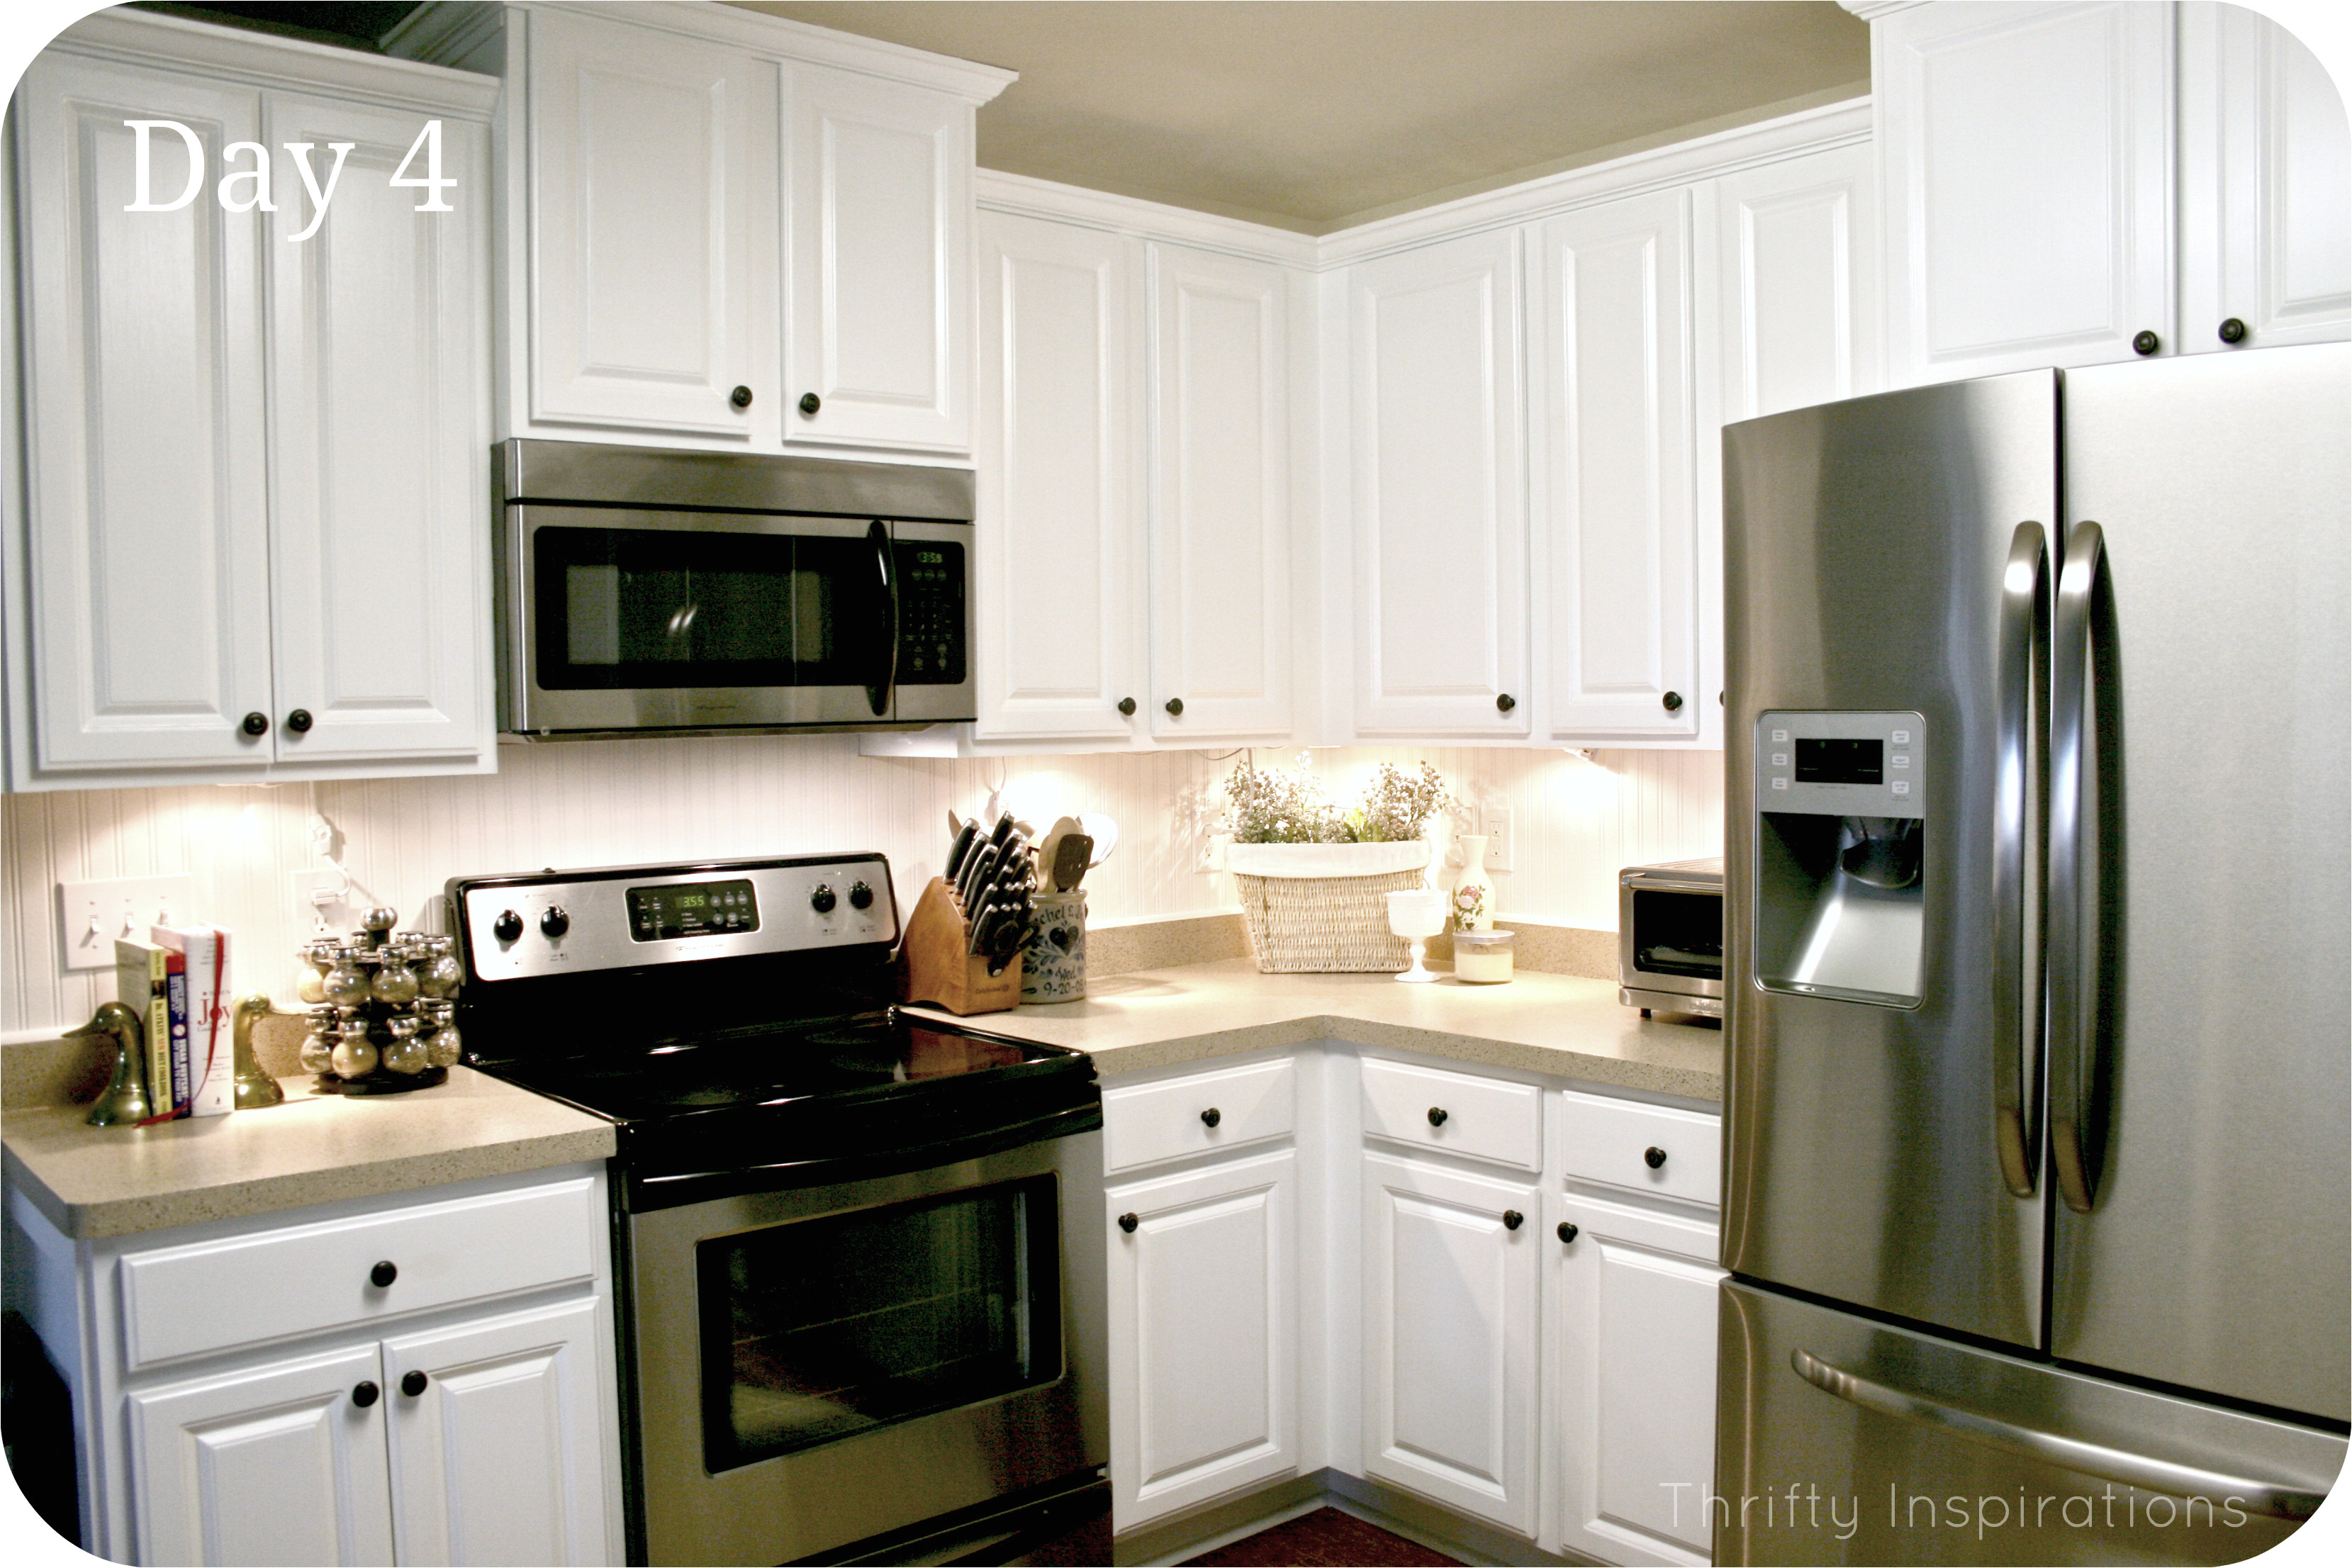 Hampton Bay Cabinets From Home Depot Kitchen Cabinets Home Depot Prices Kitchen sohor